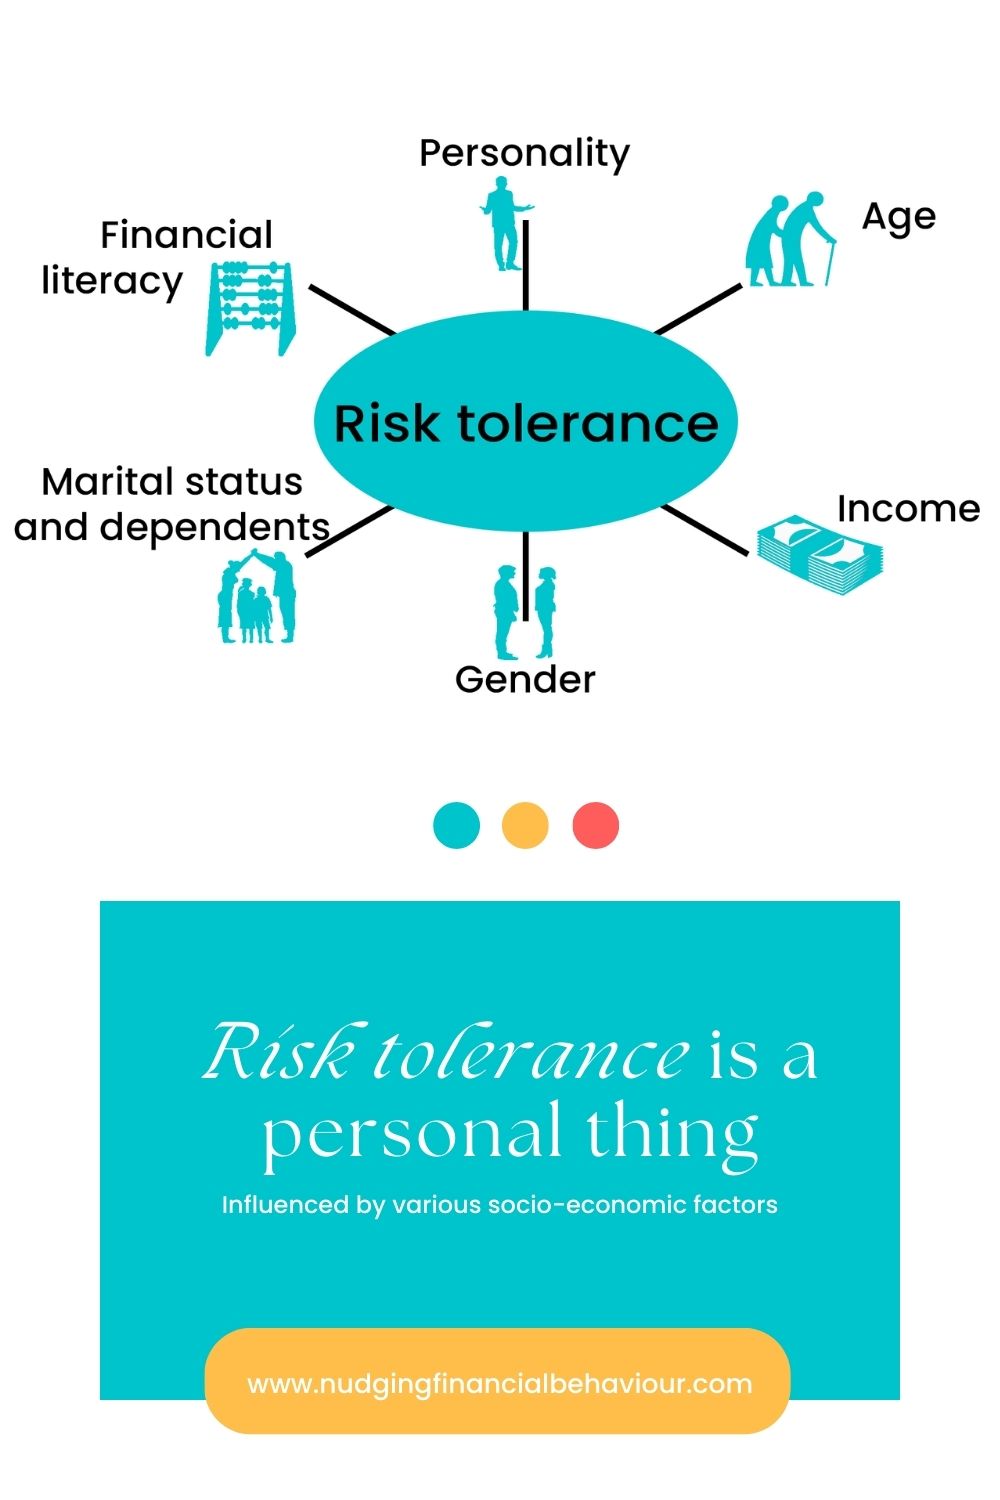 Failure to plan is planning to fail with risk tolerance